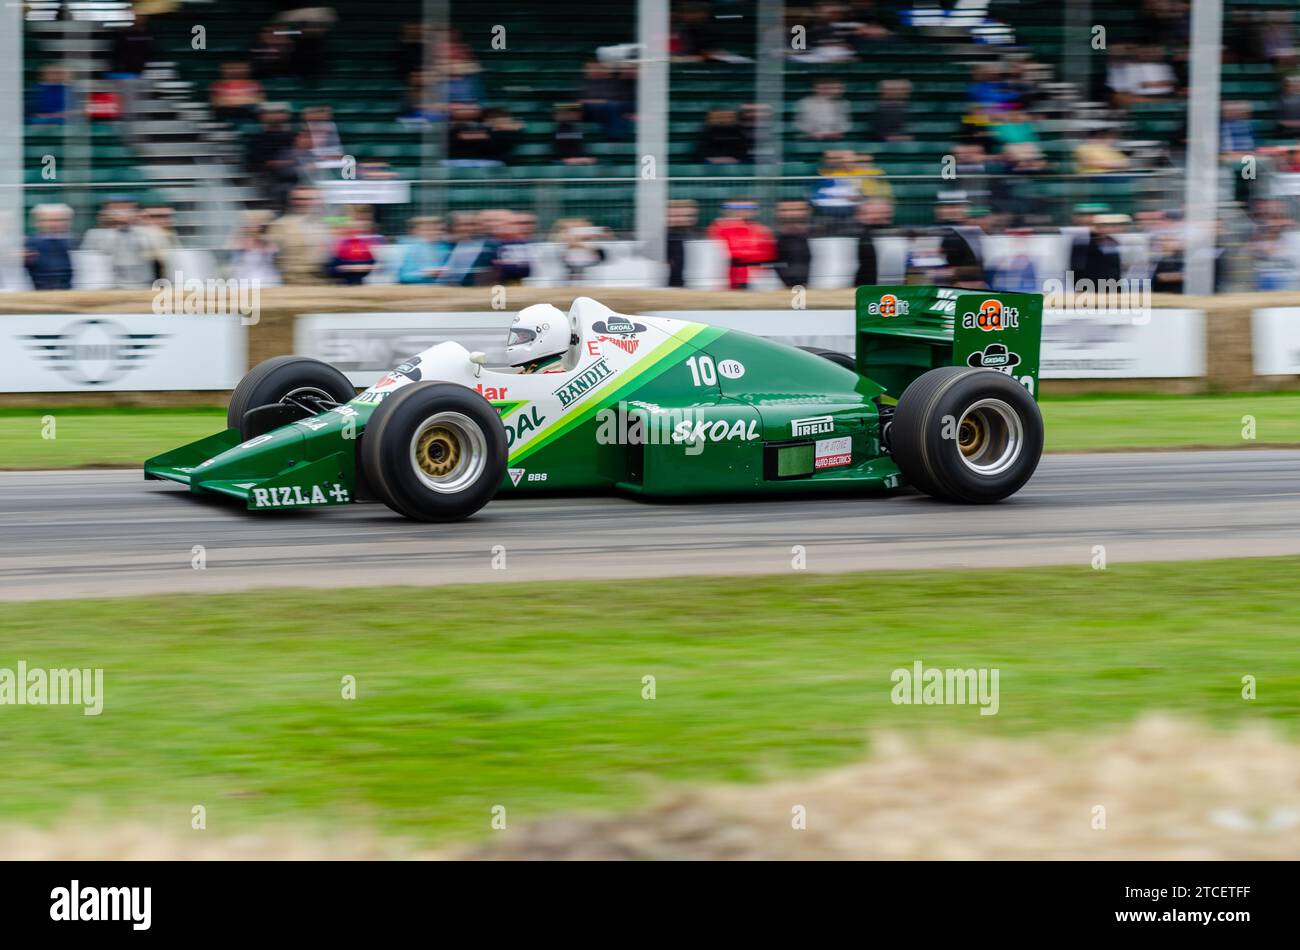 1985 RAM 03 Formula 1, Grand Prix, racing car driving up the hill climb track at the Goodwood Festival of Speed motoring event in 2016. RAM Hart Stock Photo